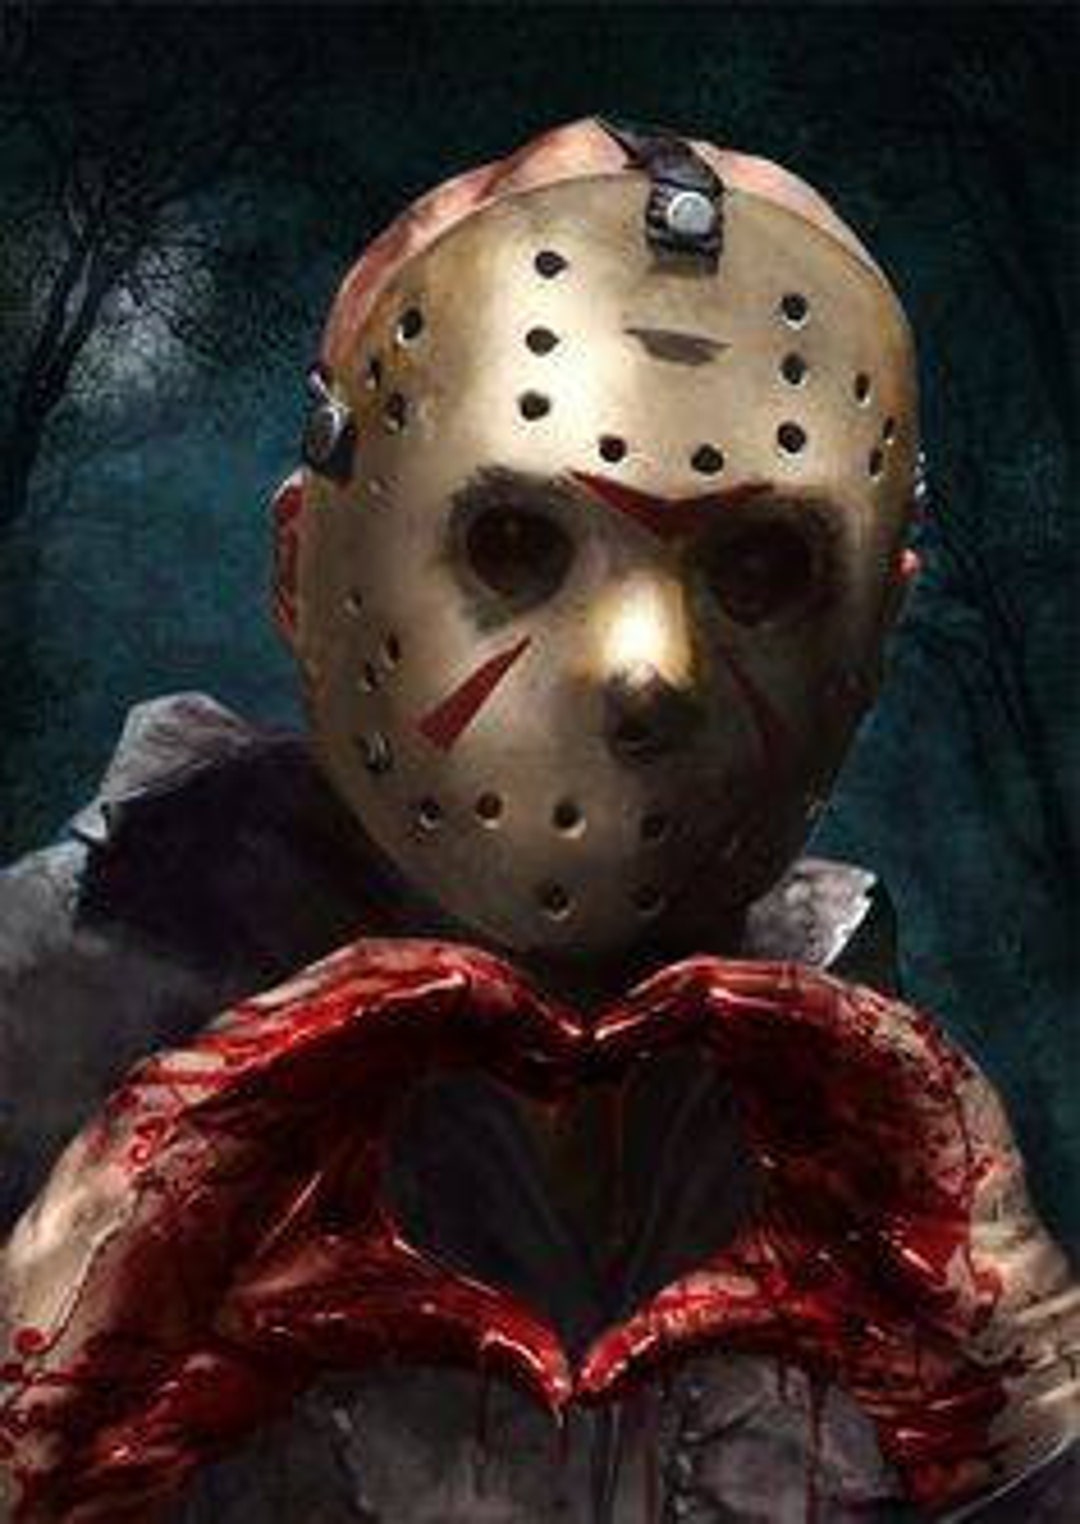 Was Jason Vorhees A Real Person?